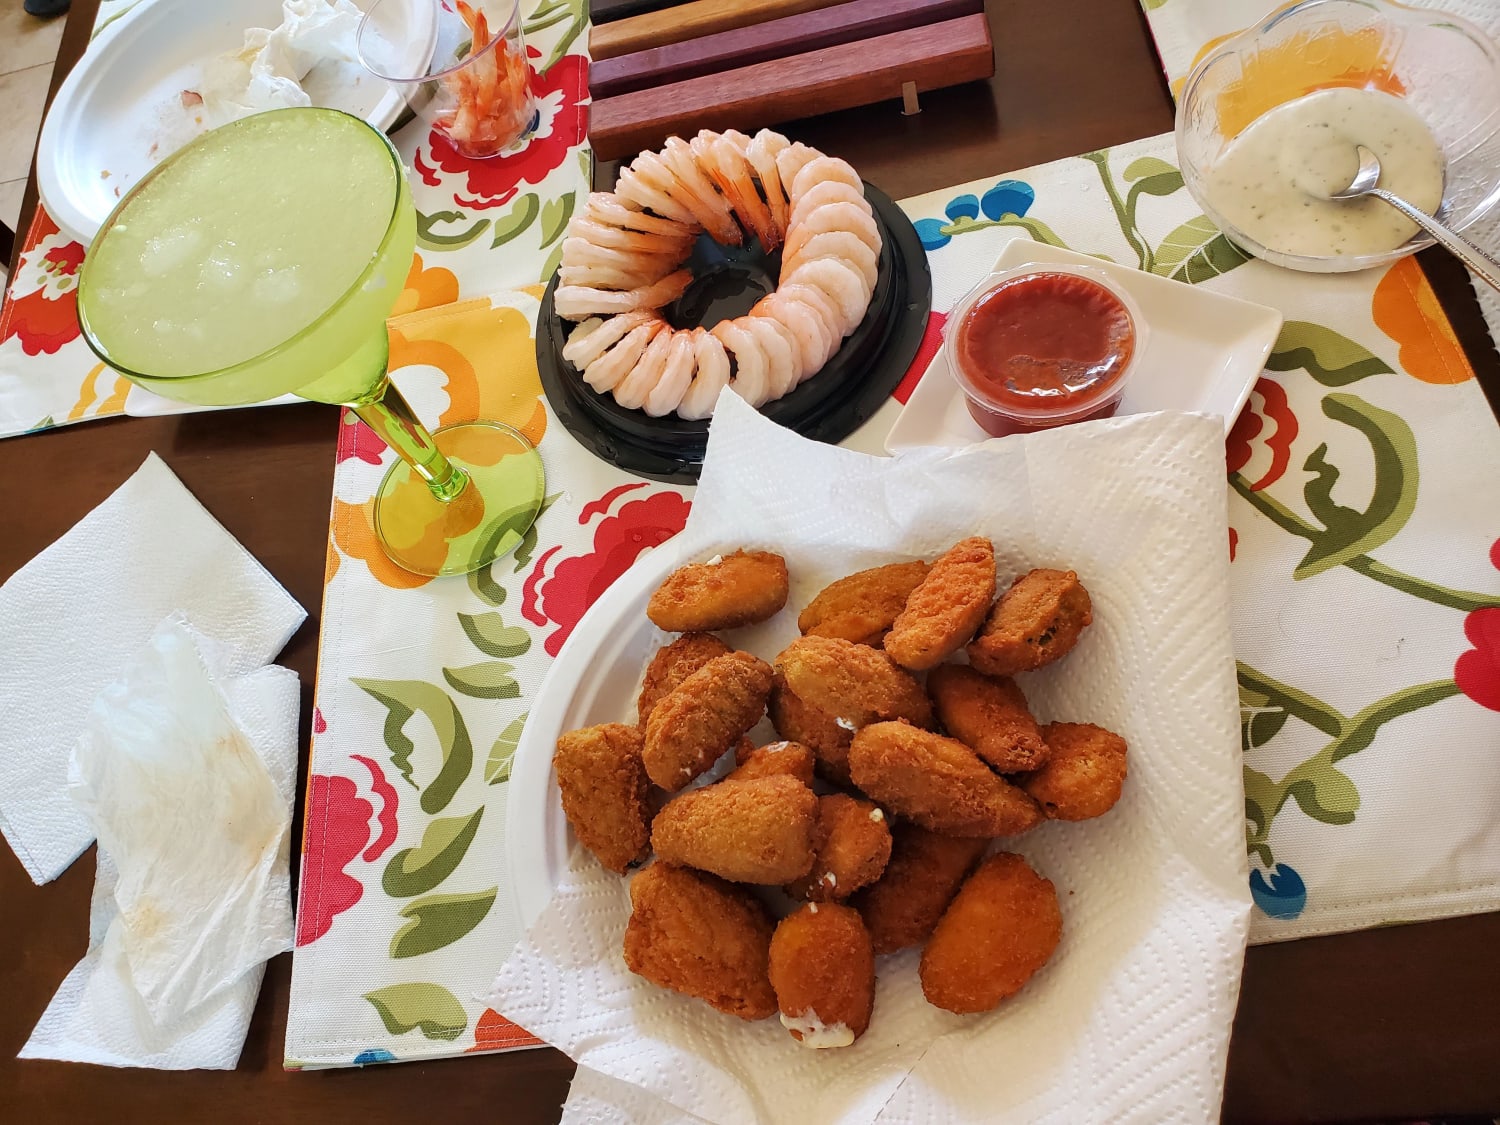 Today is my birthday and I'm celebrating with foods from my favorite show! Margaritas, jalapeño poppers, and shrimp!